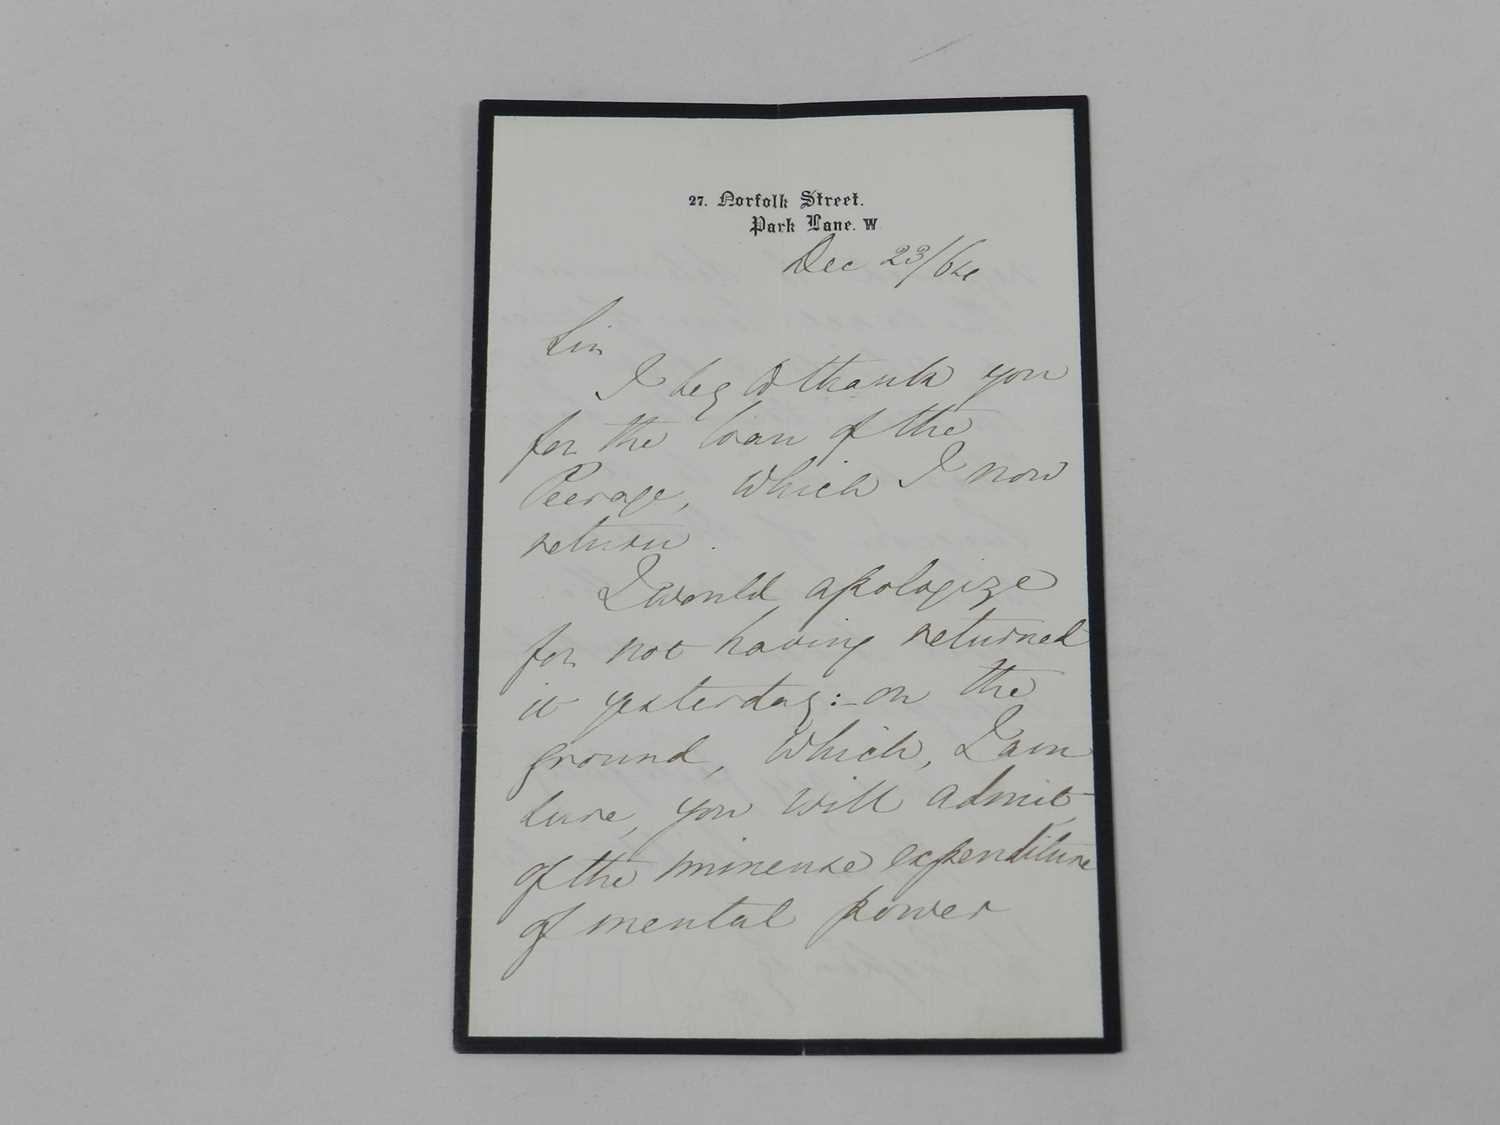 NIGHTINGALE, Florence, Nursing Pioneer (1820-1910) Autograph letter signed to J.W Cooper, apparently